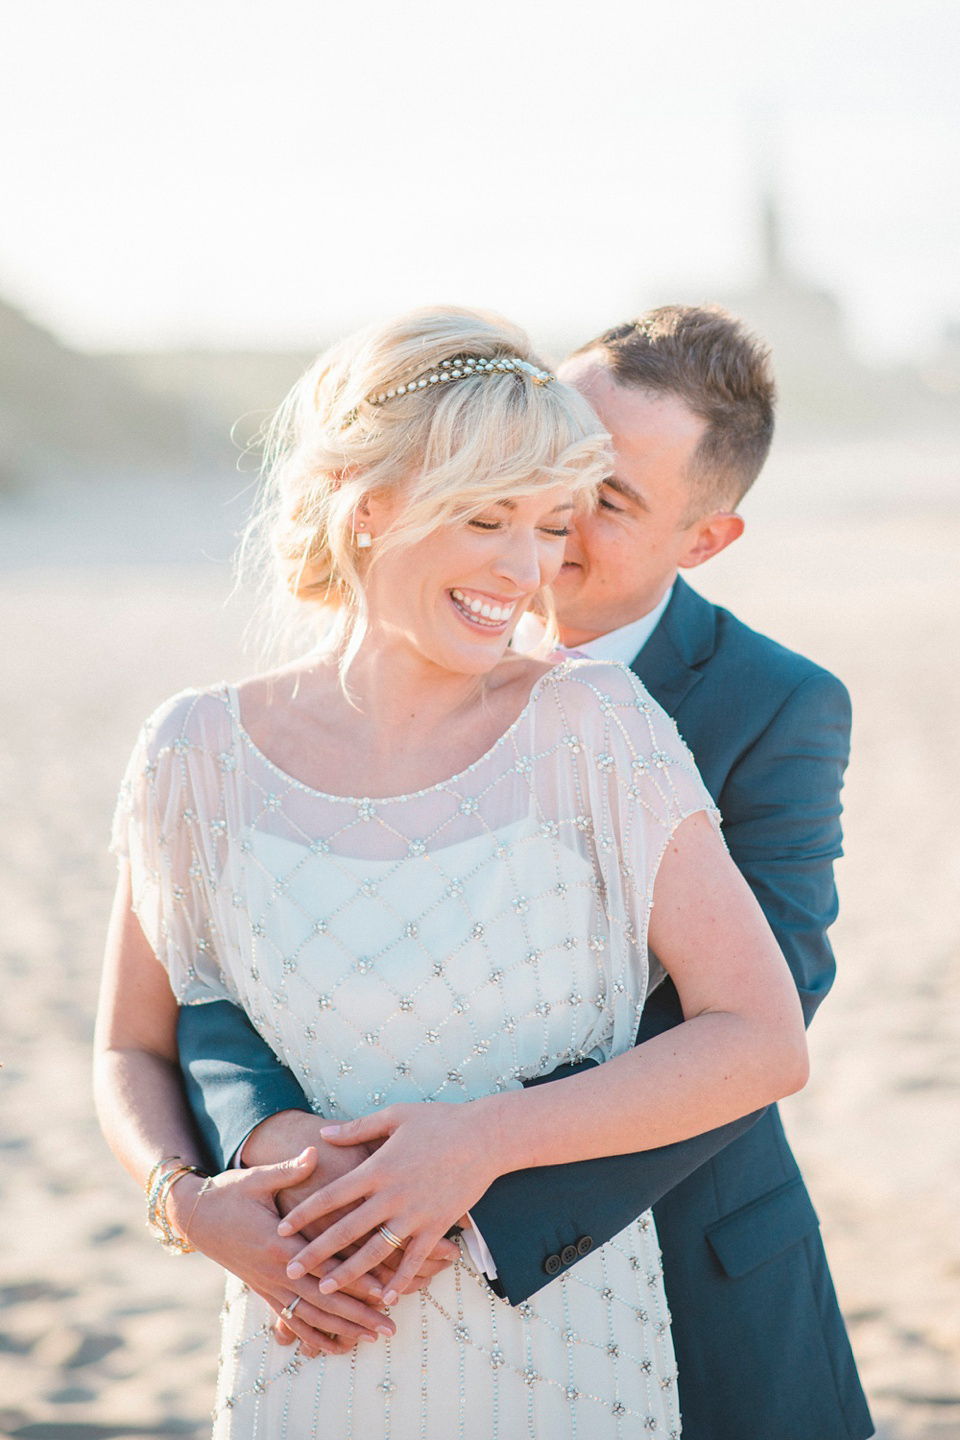 A Bali inspired beach wedding in Tynemouth with the bride wearing Jenny Packham. Photography by Sarah-Jane Ethan.